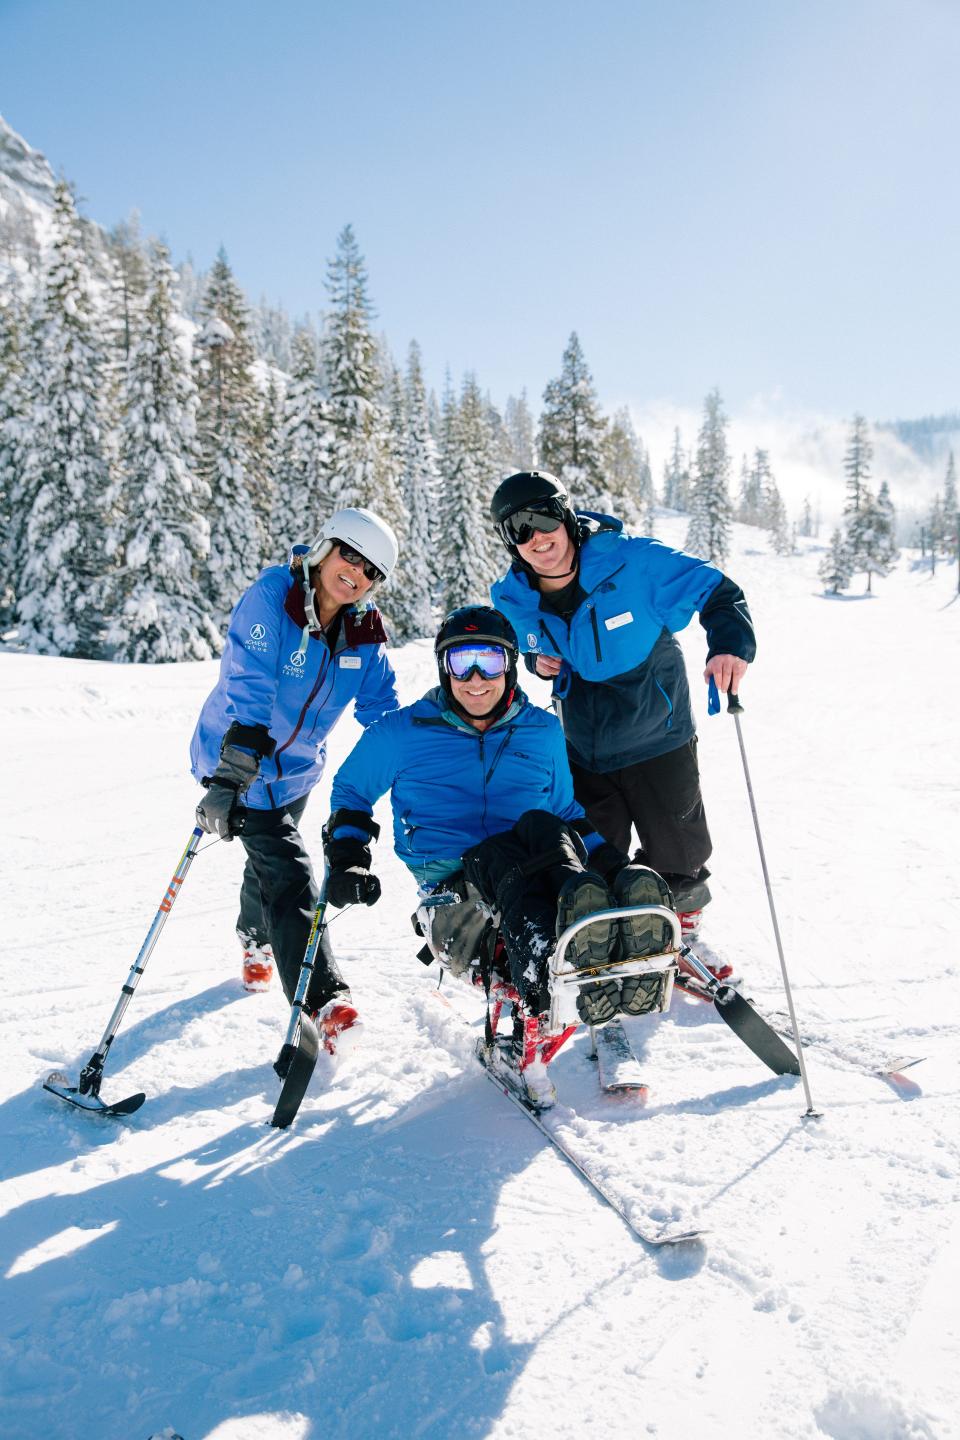 There are so many different types of adaptive skis so a wide range of abilities are able to hit the slopes. As your skills progress, you may even change up your gear.